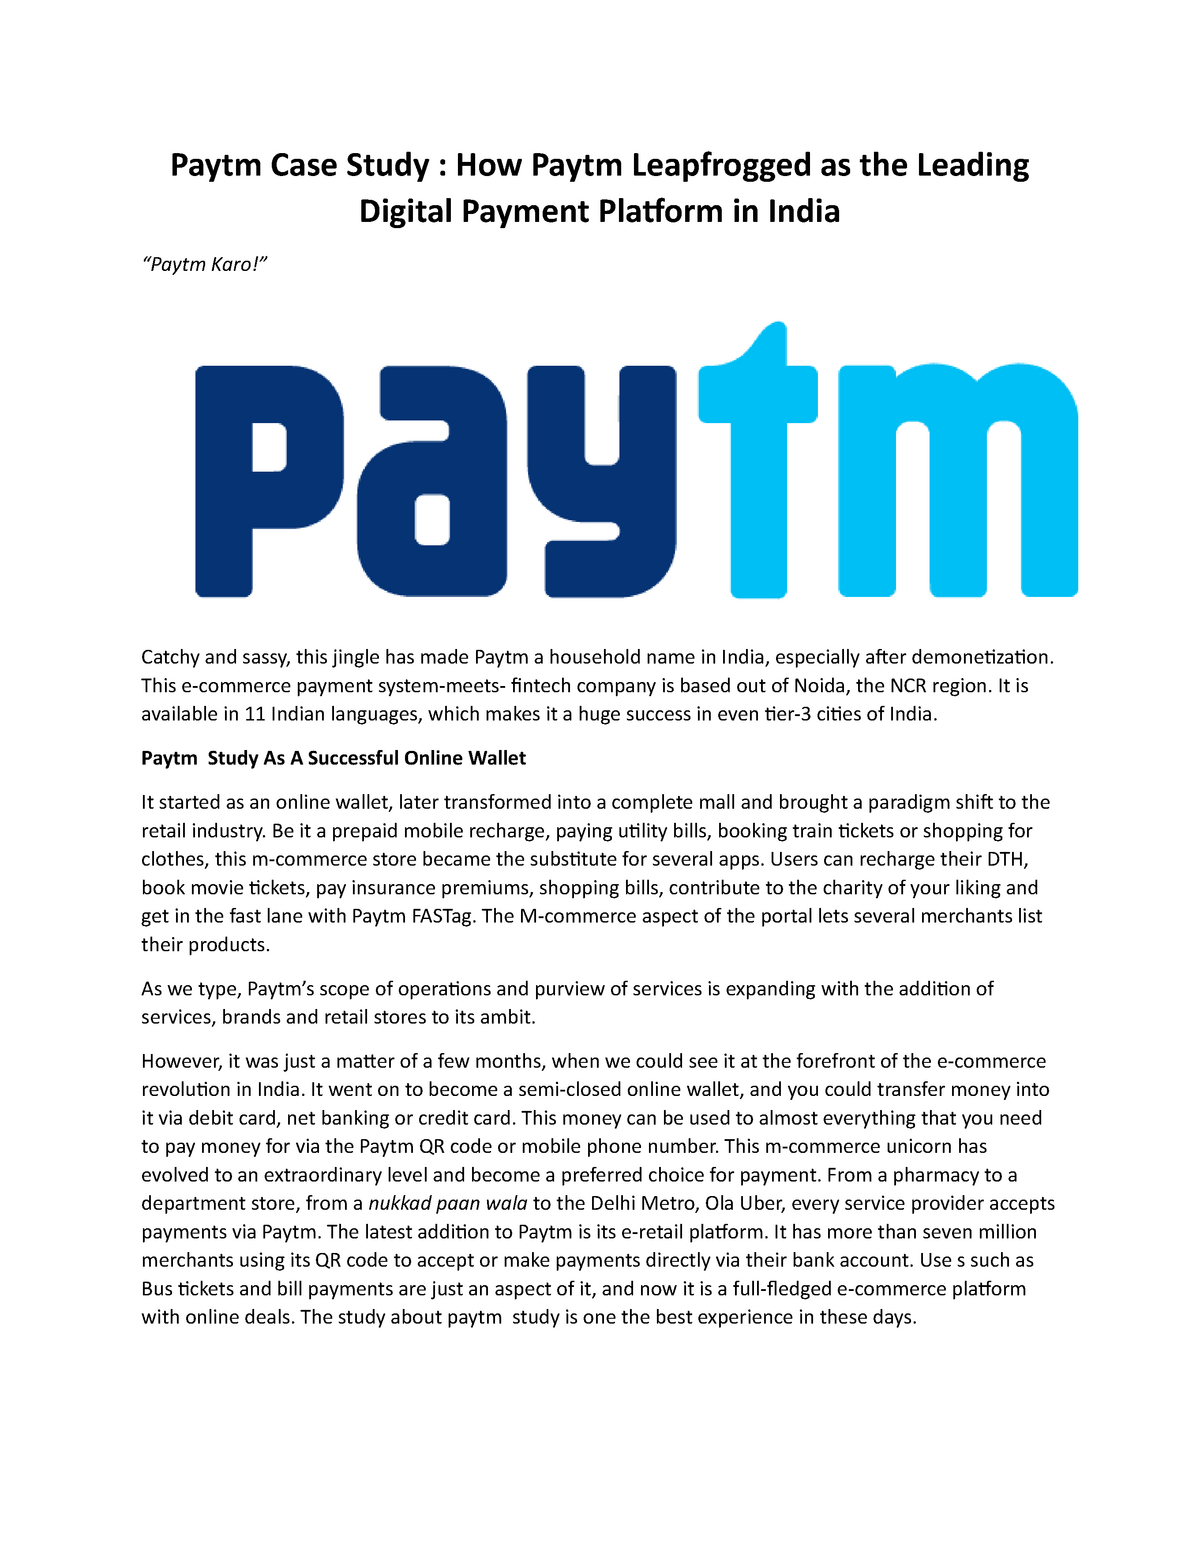 research report on paytm